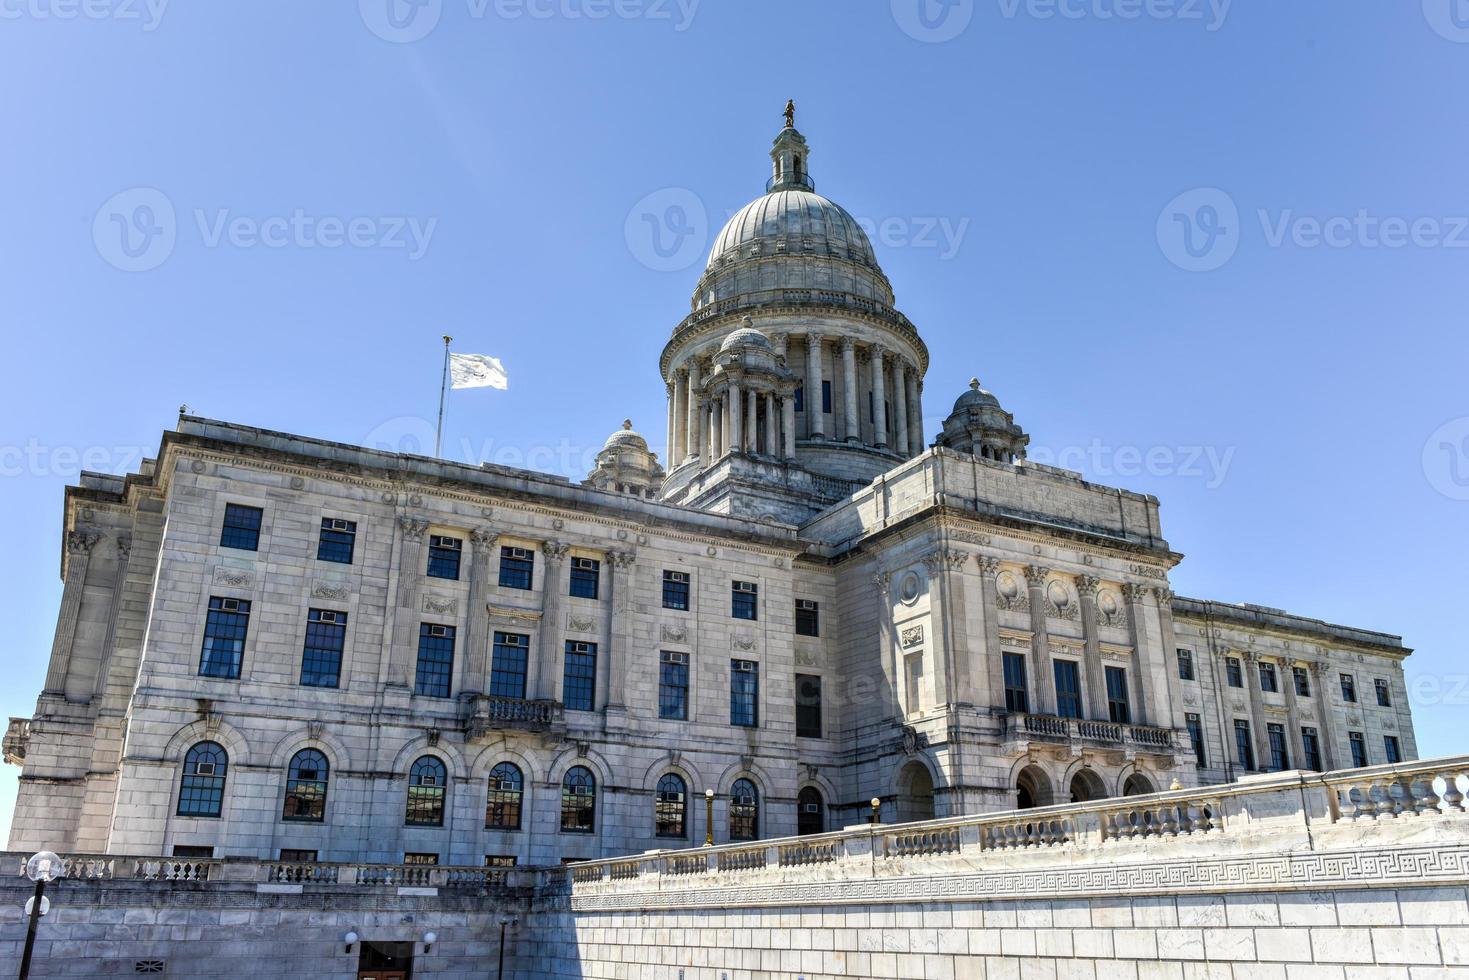 The Rhode Island State House, the capitol of the U.S. state of Rhode Island. photo